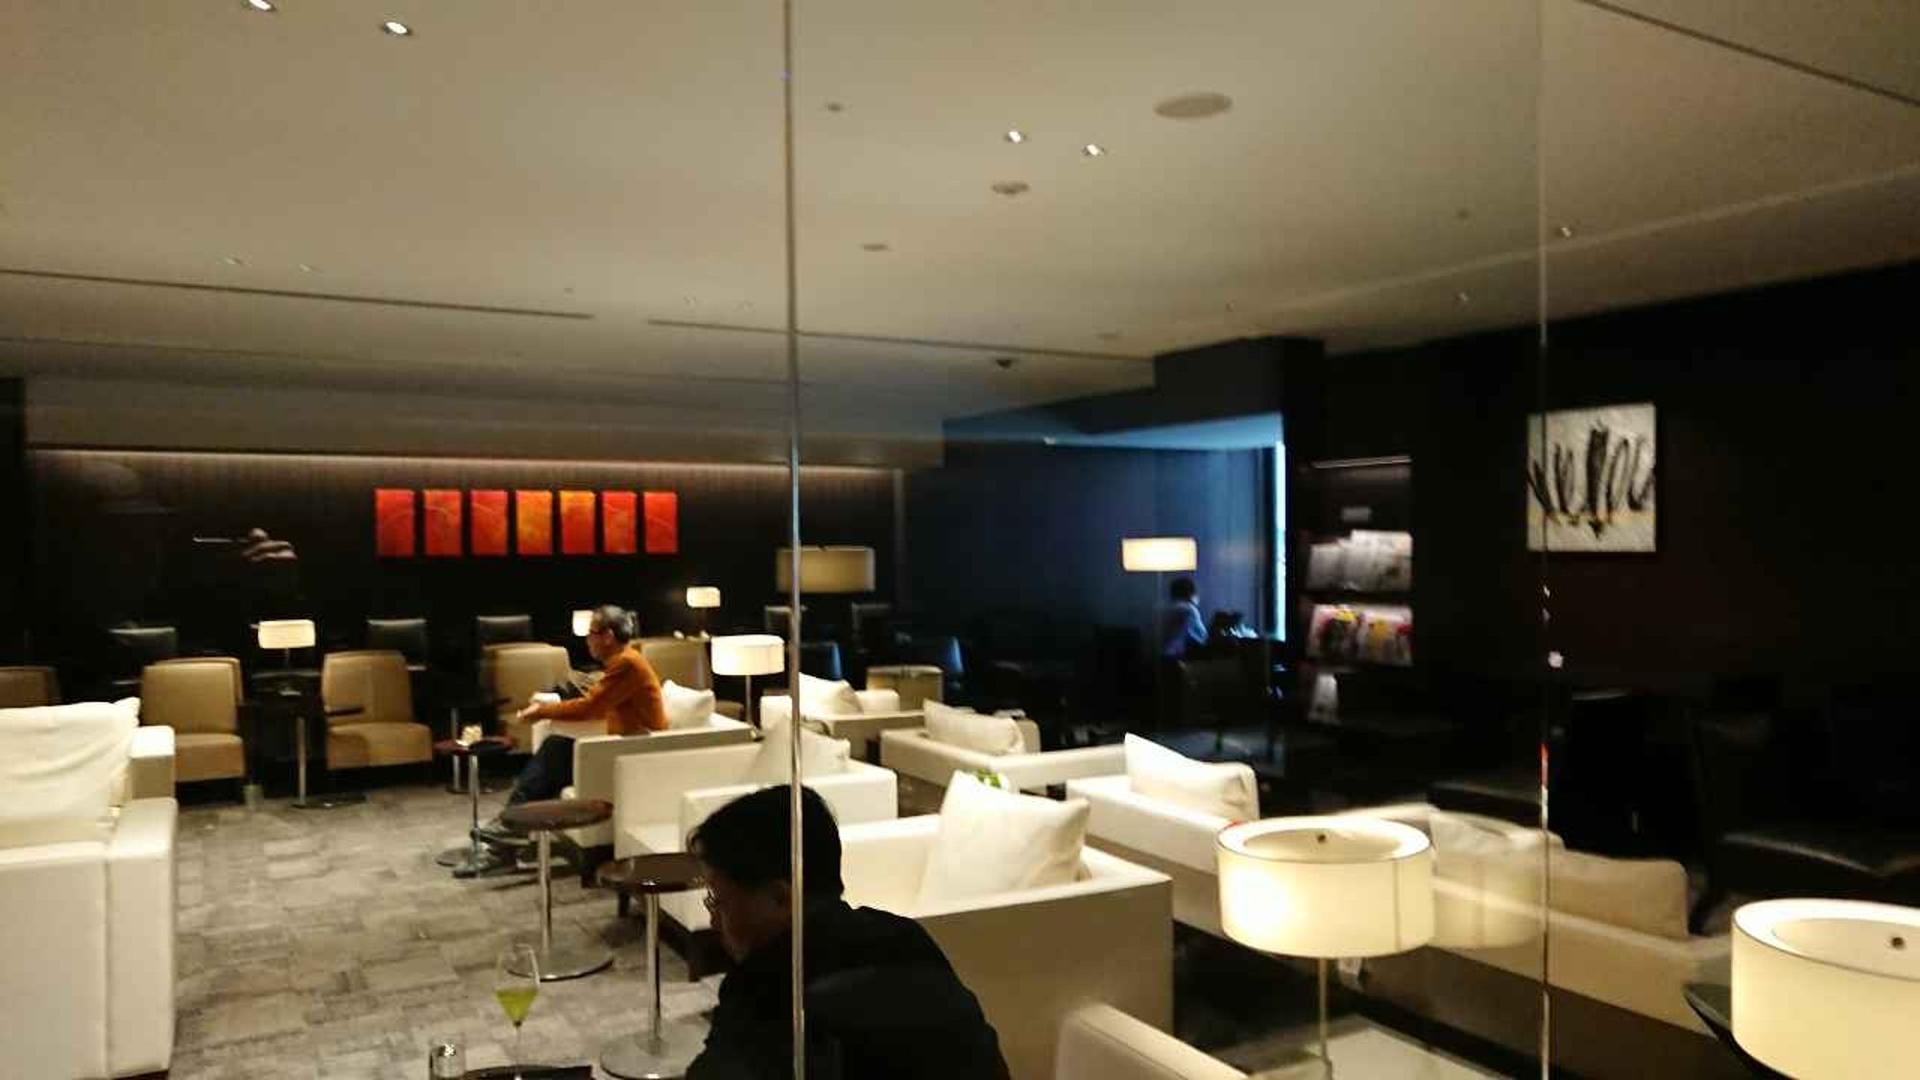 Japan Airlines JAL First Class Lounge image 41 of 50